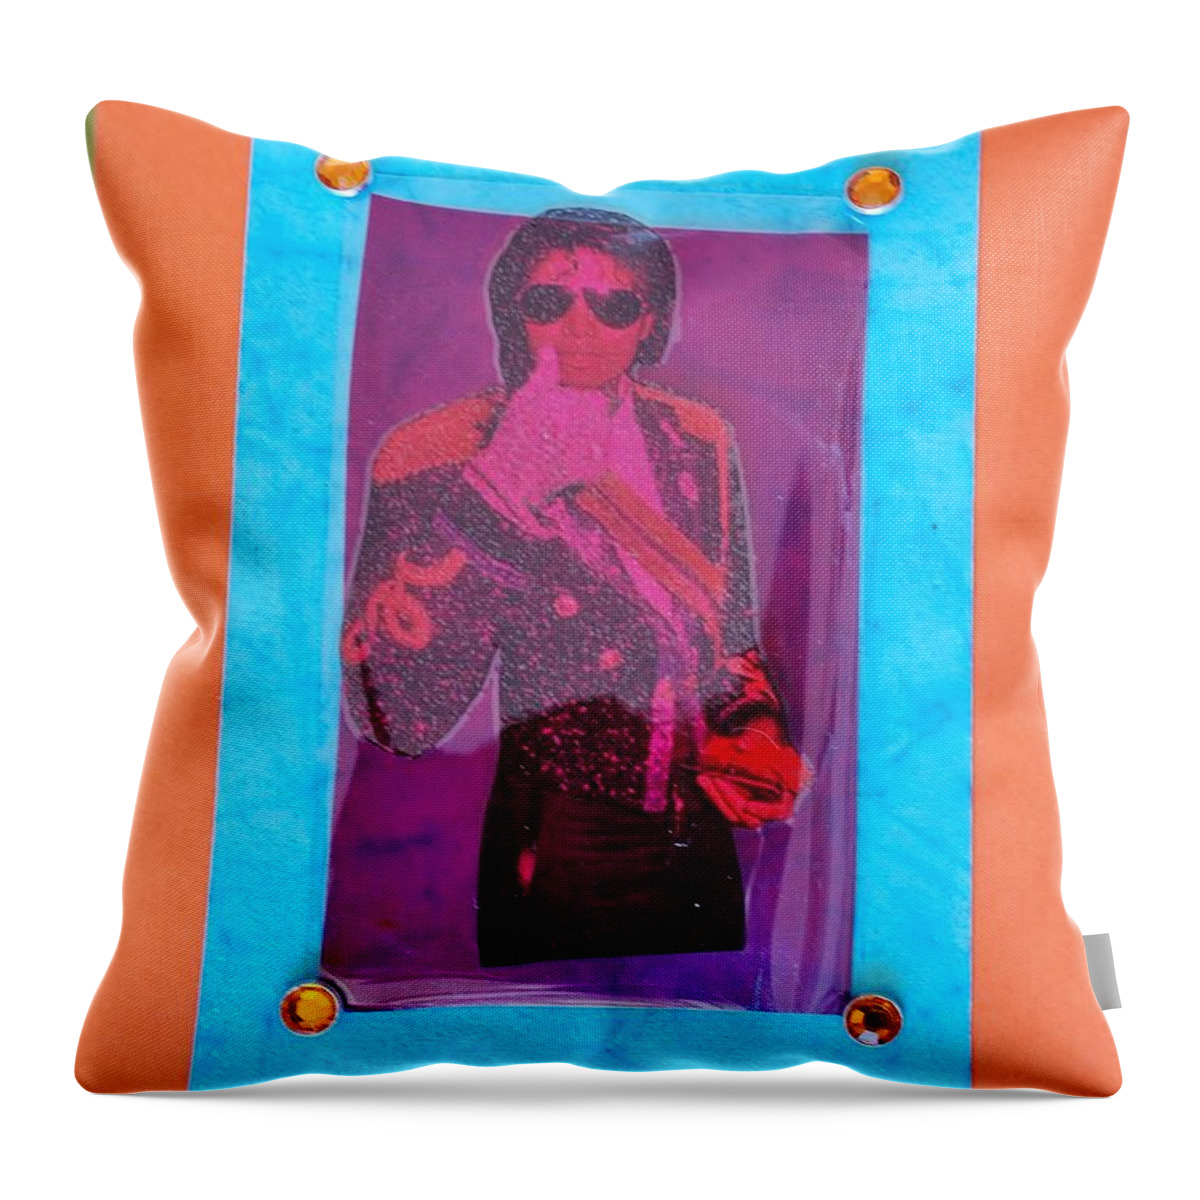 Mixed Media Throw Pillow featuring the drawing MJ Grammy awards by Karen Buford